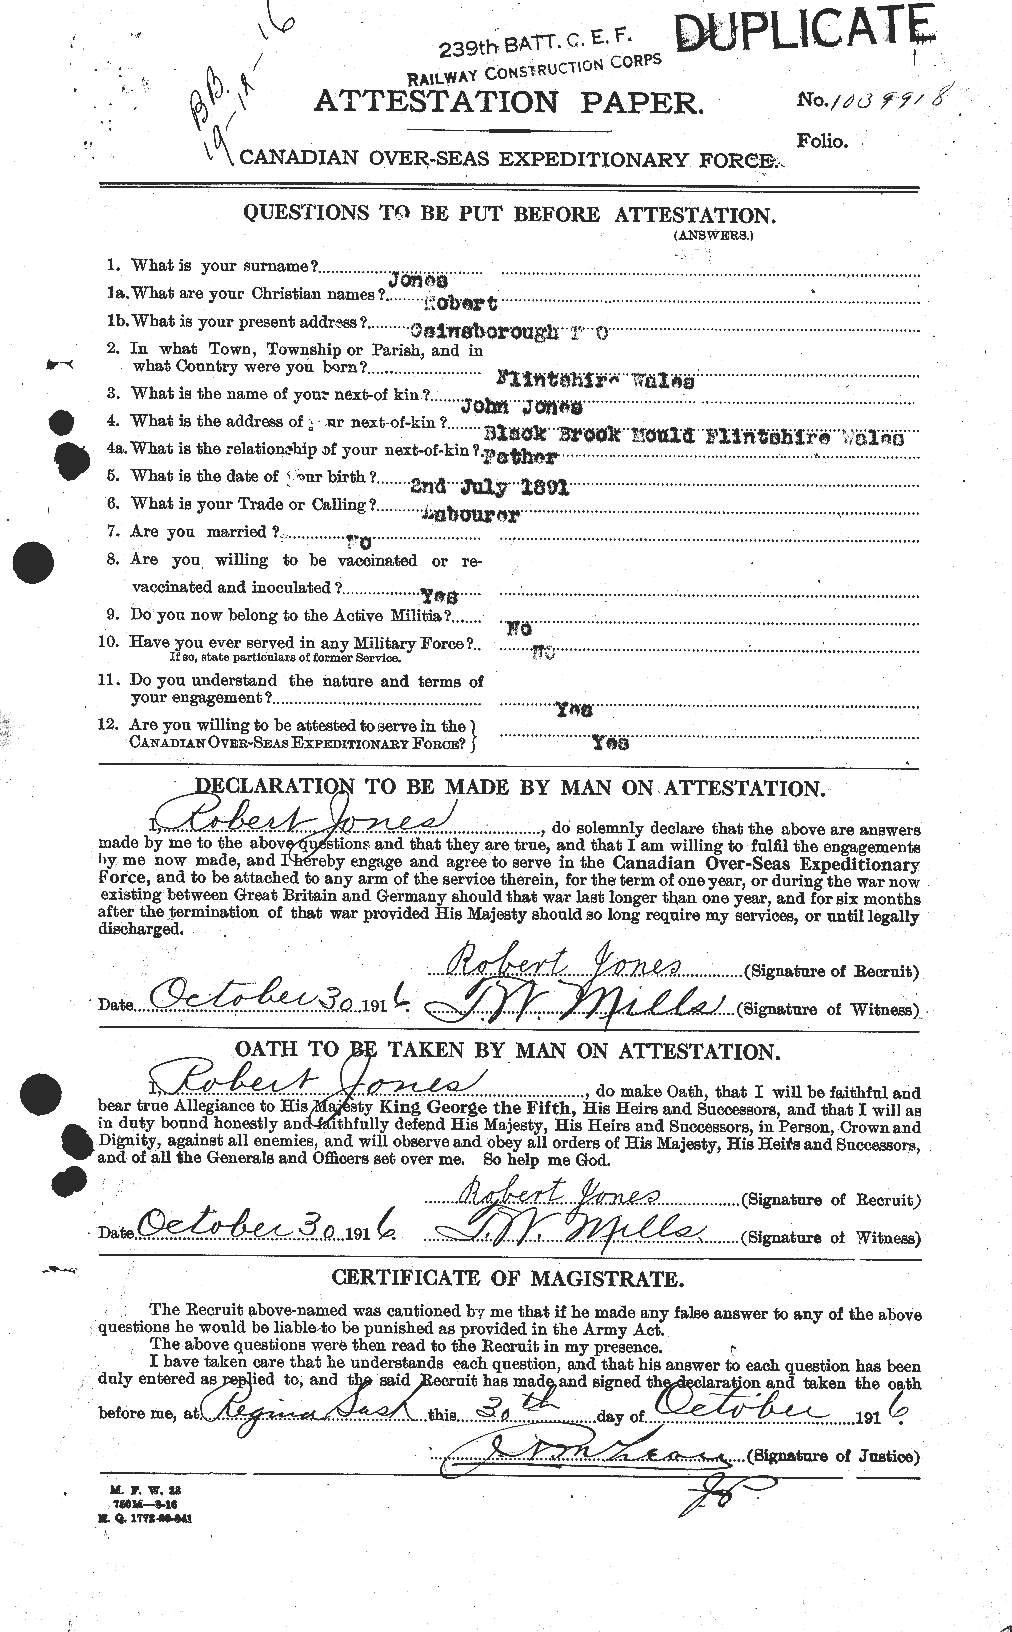 Personnel Records of the First World War - CEF 424920a